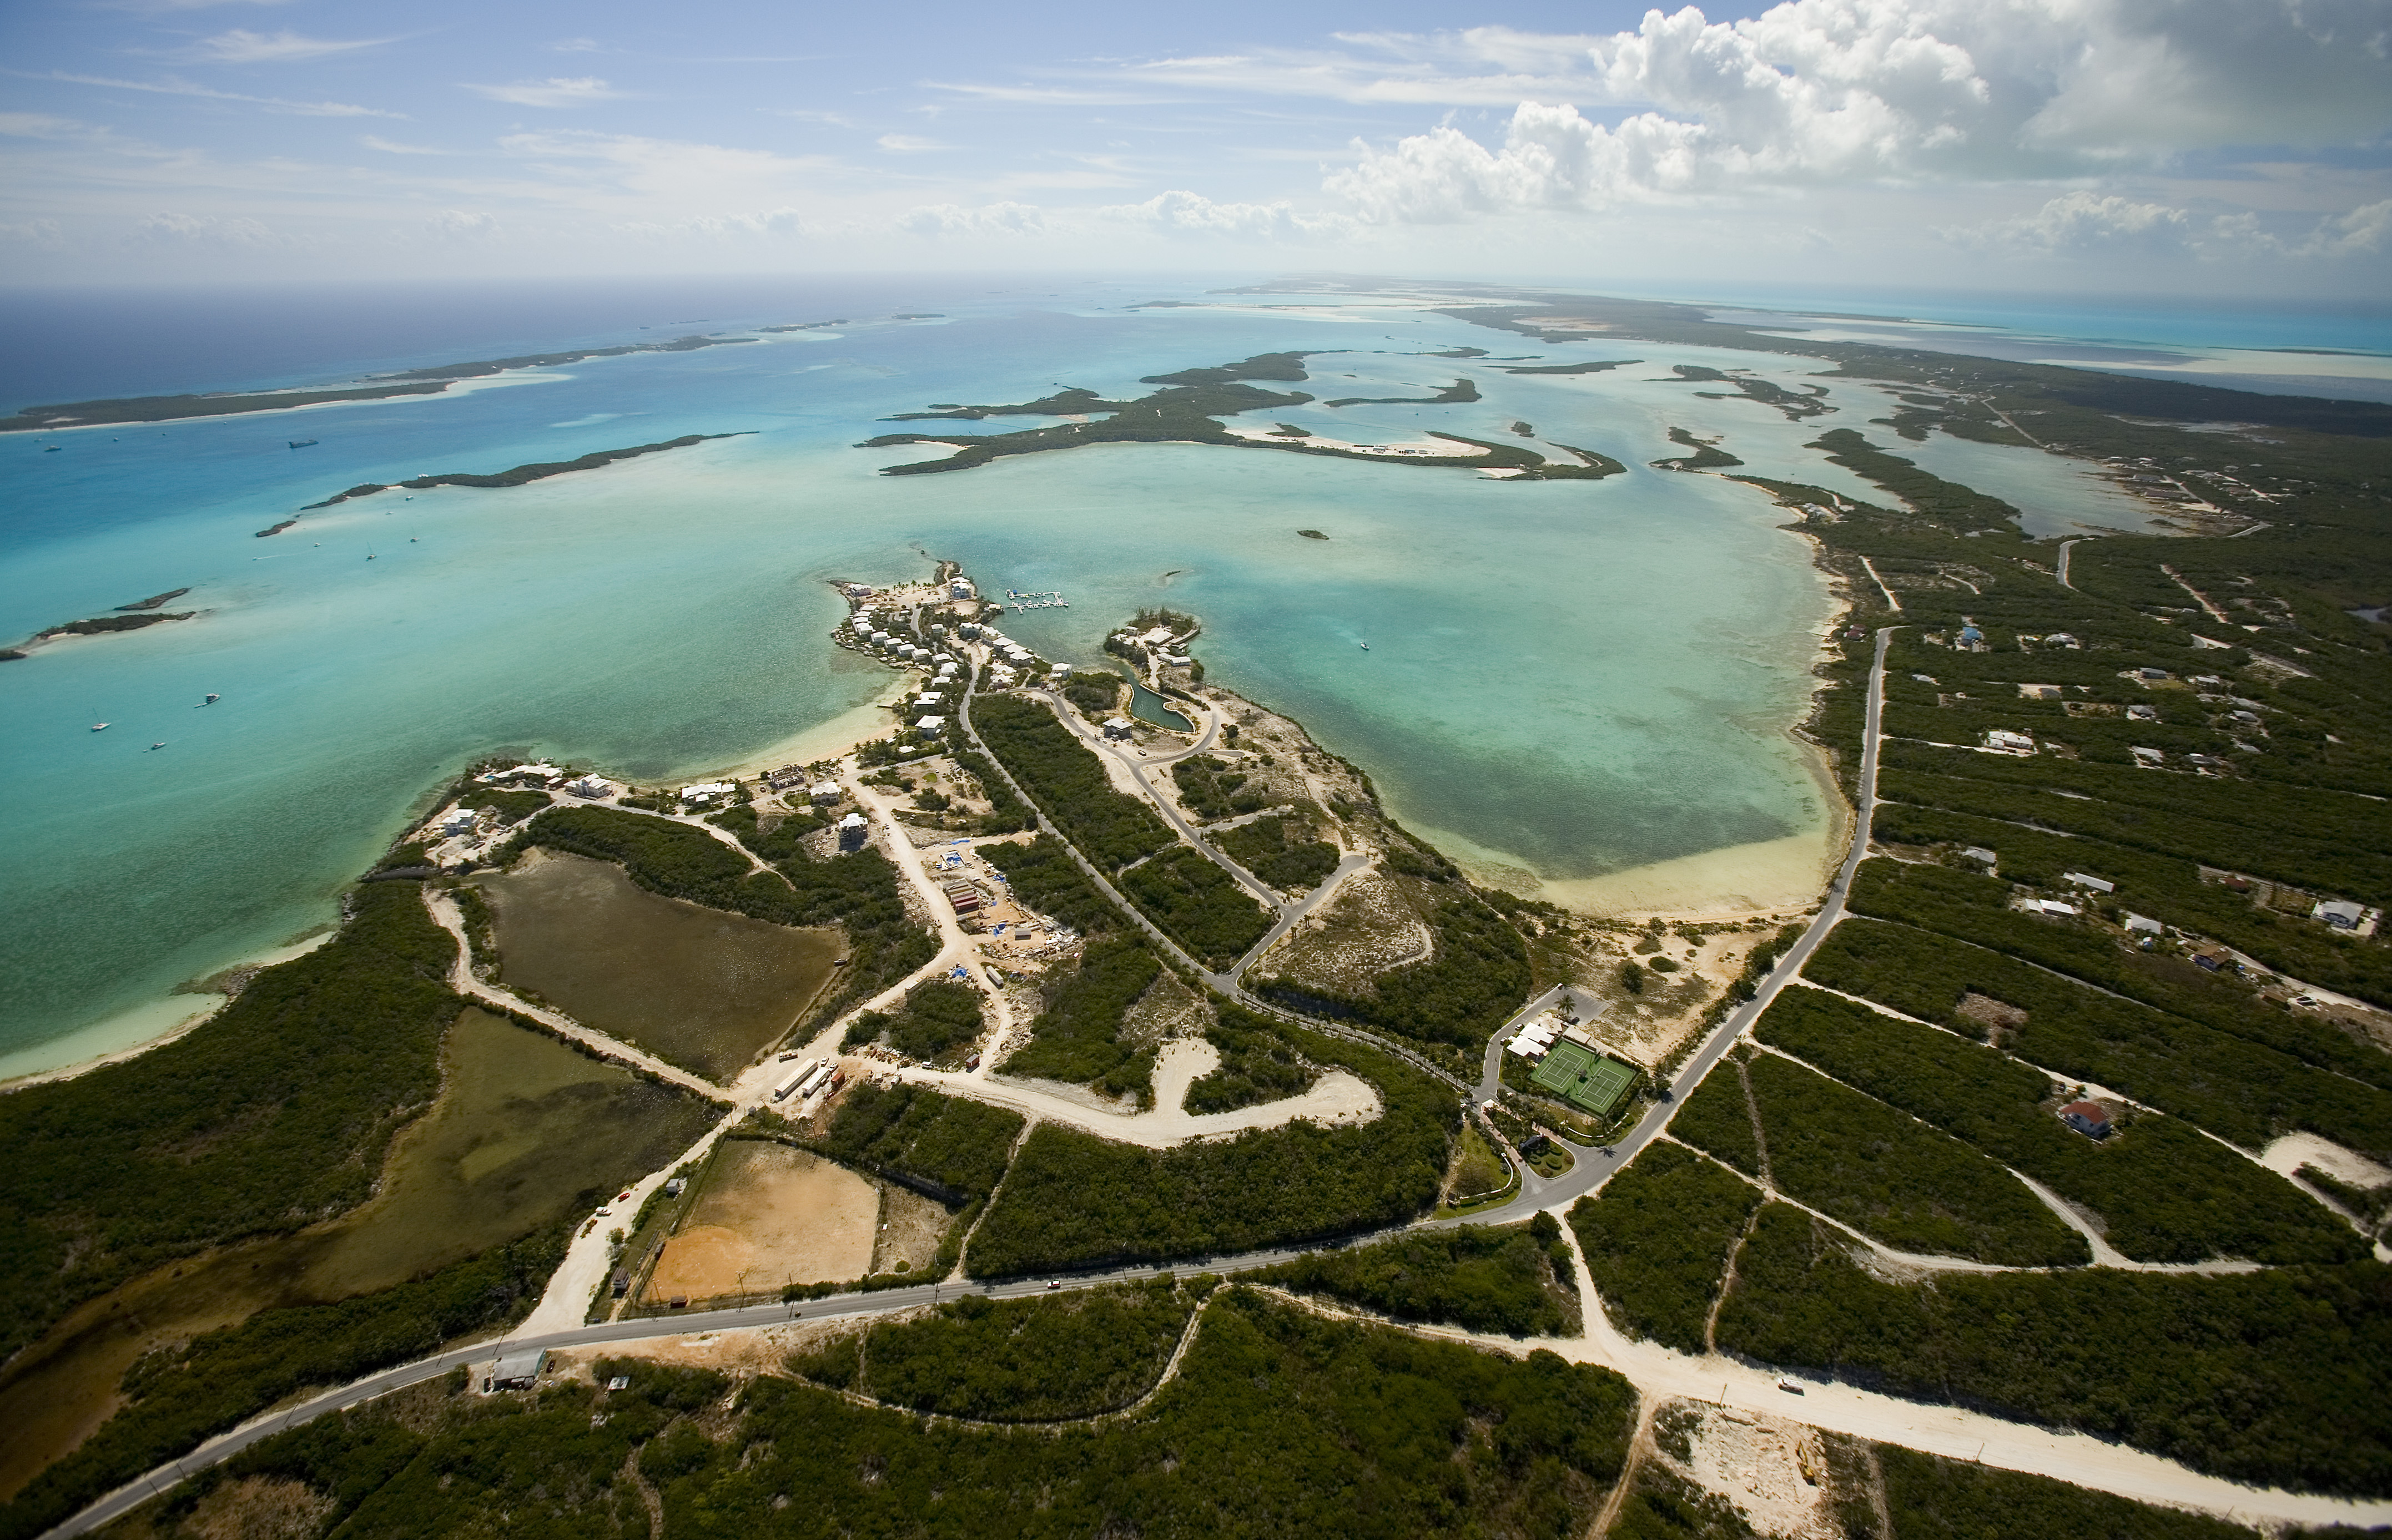 Direct Flight to the Bahamas Gives Travelers Unforgettable Opportunity